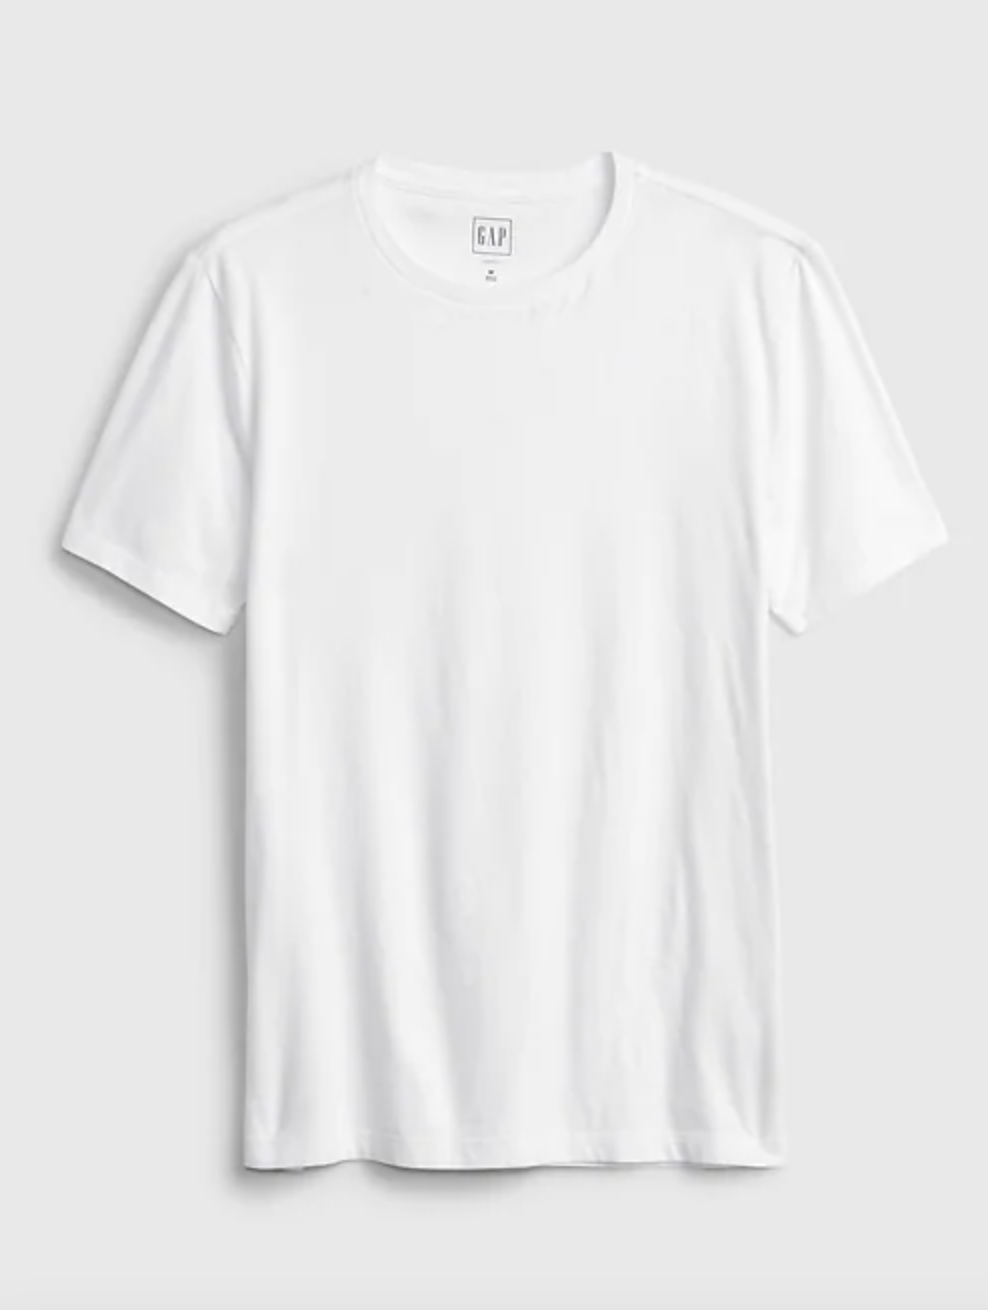 Literacy vedtage imod The 13 Best Men's White T-Shirts According to Men